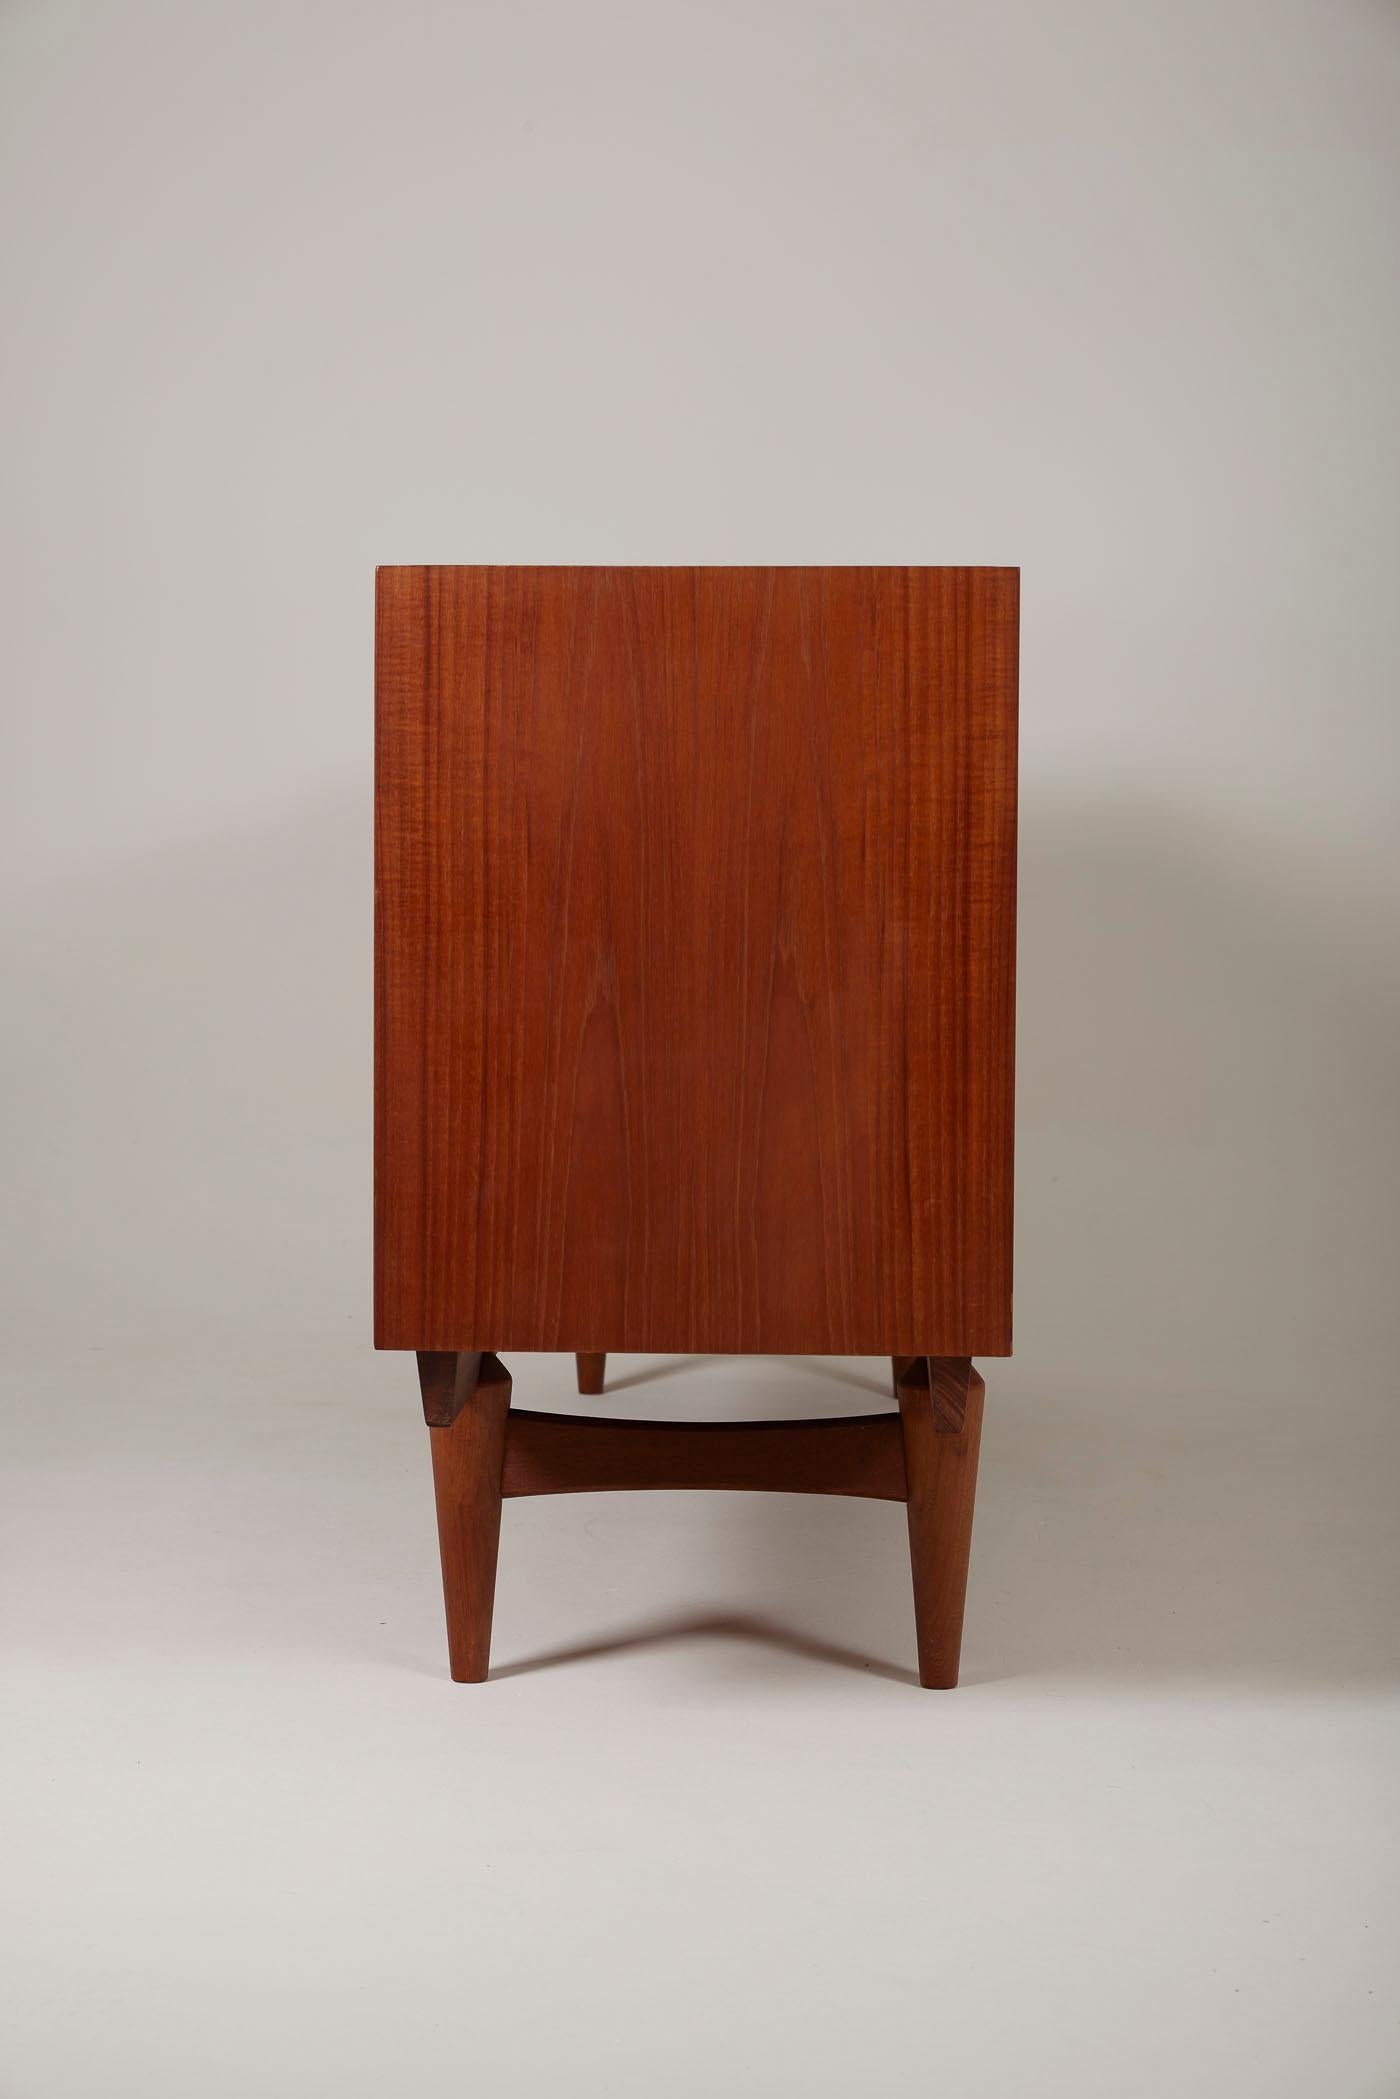 Sideboard by Norwegian designers Rolf Rastad & Adolf Relling for Gustav Bahus Norway, 1960. Teak sideboard crafted with graphic patterns. It consists of 4 doors and several storage compartments. This piece of furniture is marked with the